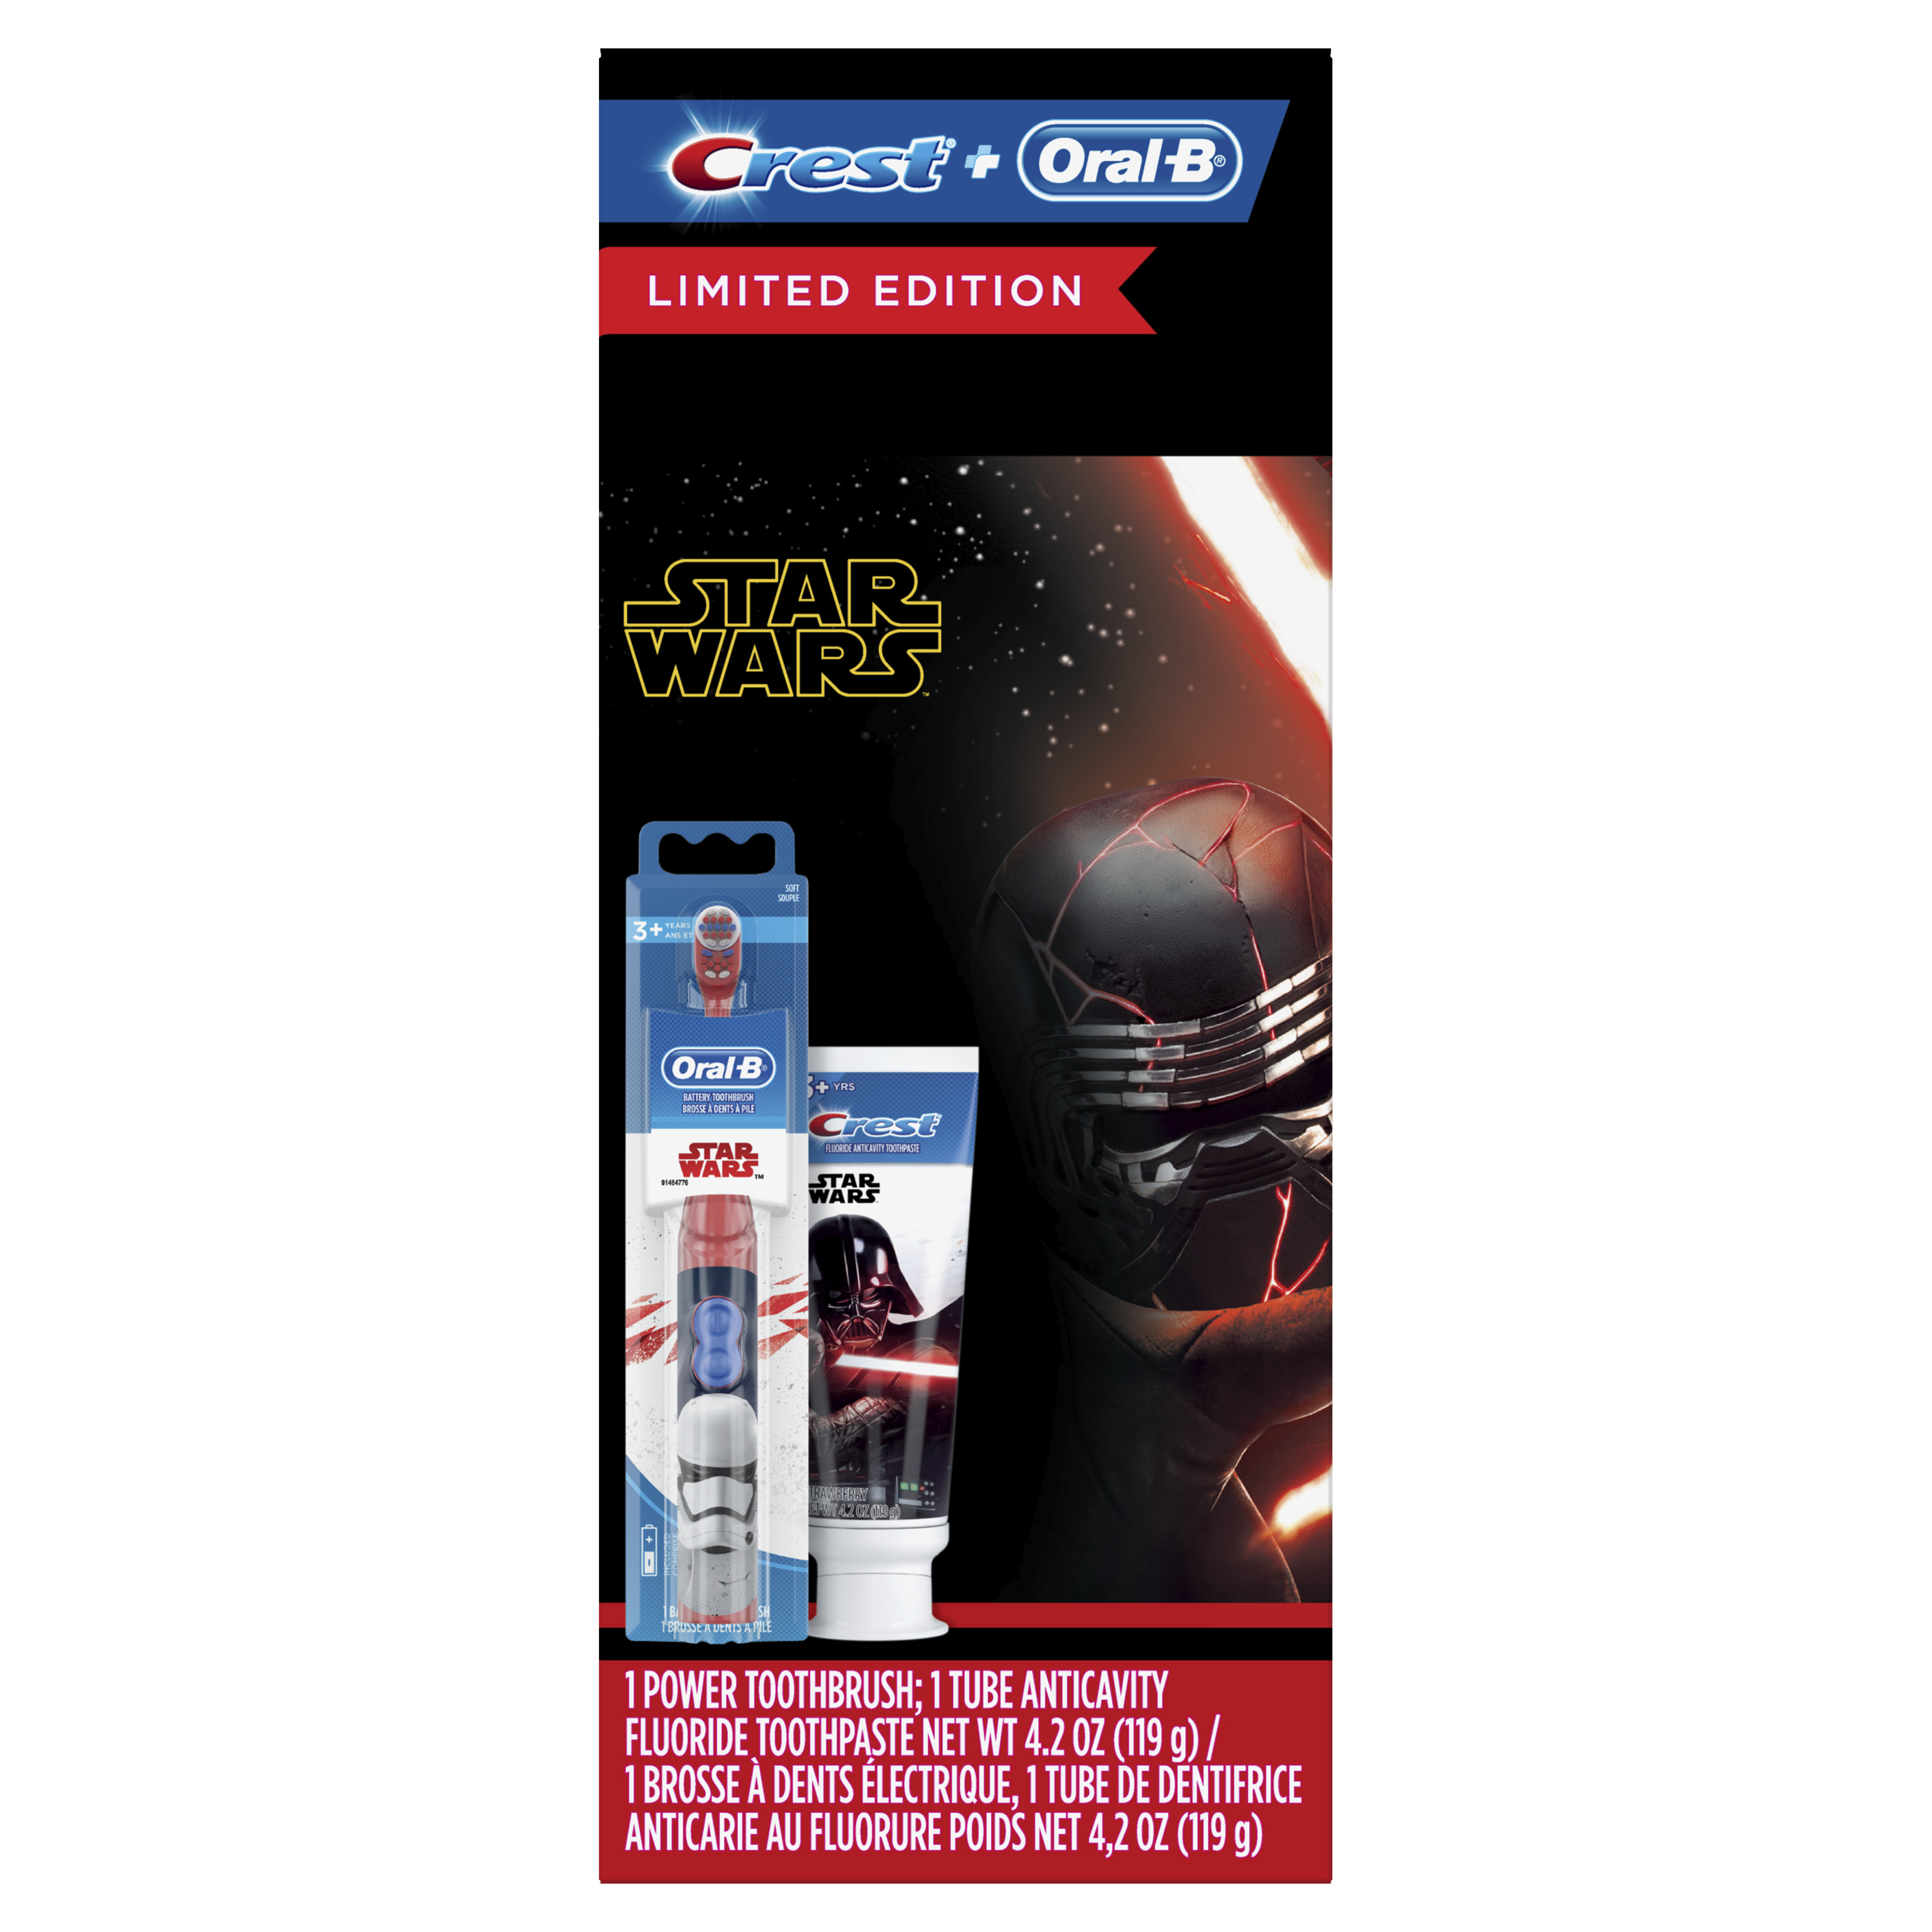 Crest & Oral-B Kids Star Wars Gift Pack with Power Toothbrush and Toothpaste, 4.2 Oz - image 1 of 10